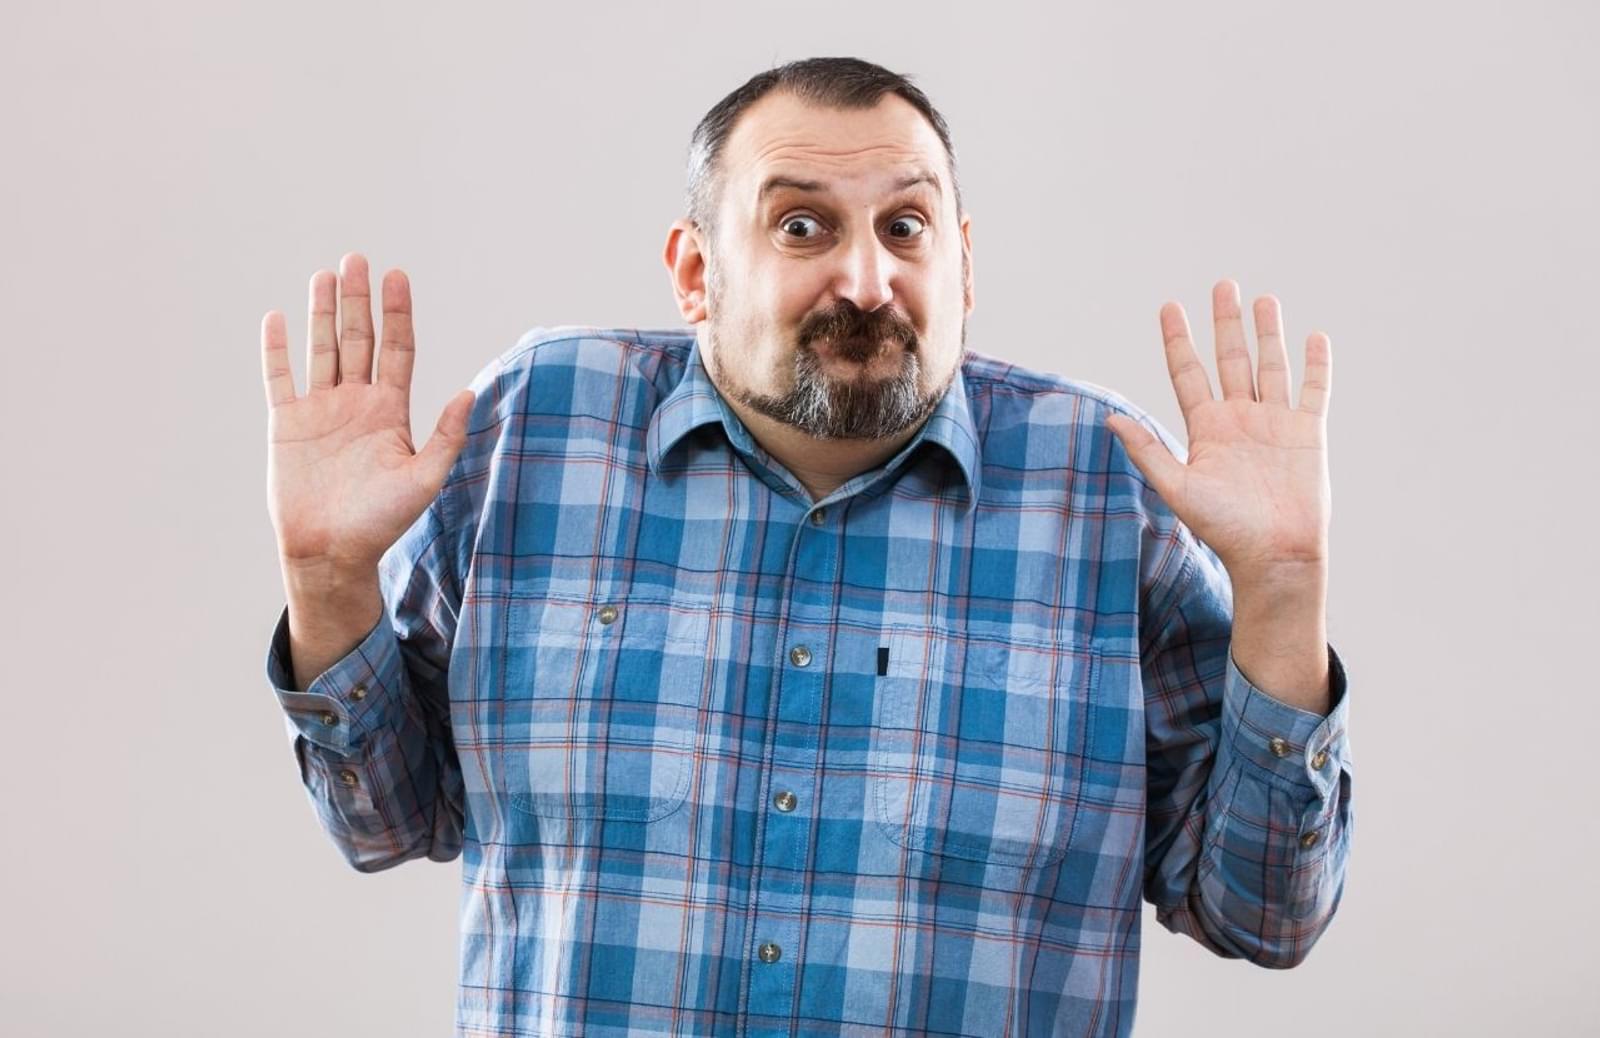 Man in plaid shirt standing with arms raised at elbows